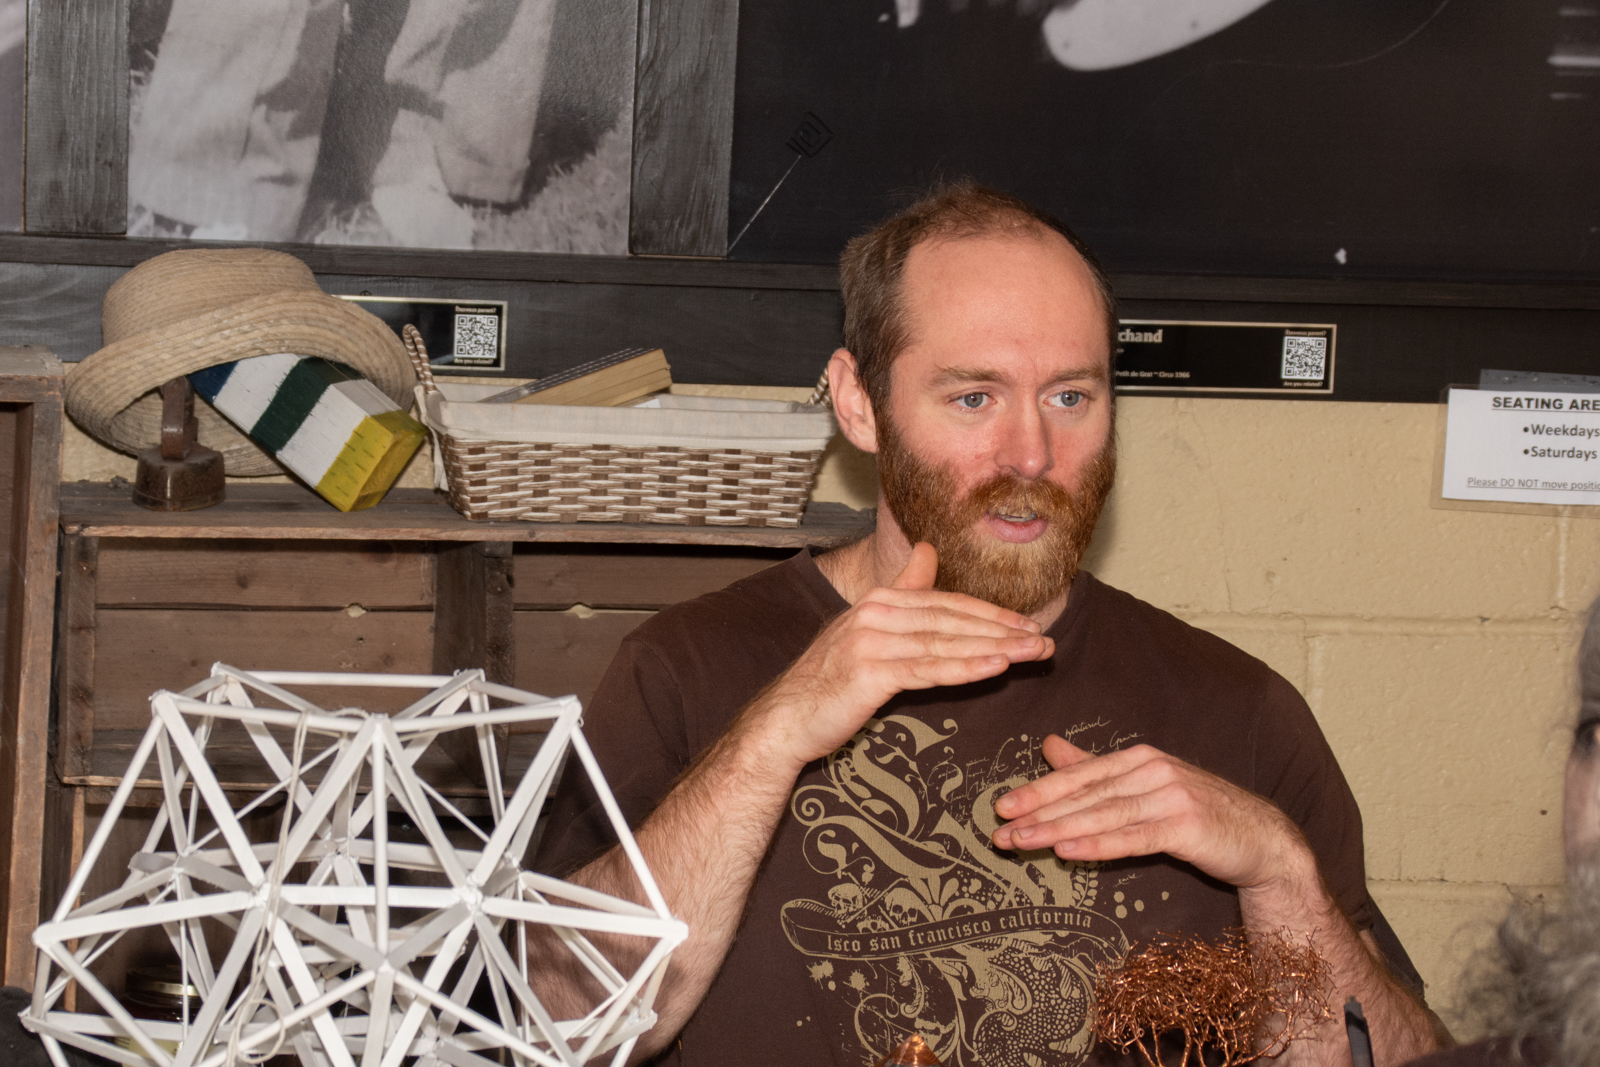 Man in cafe behind a dodecahedron sclupture